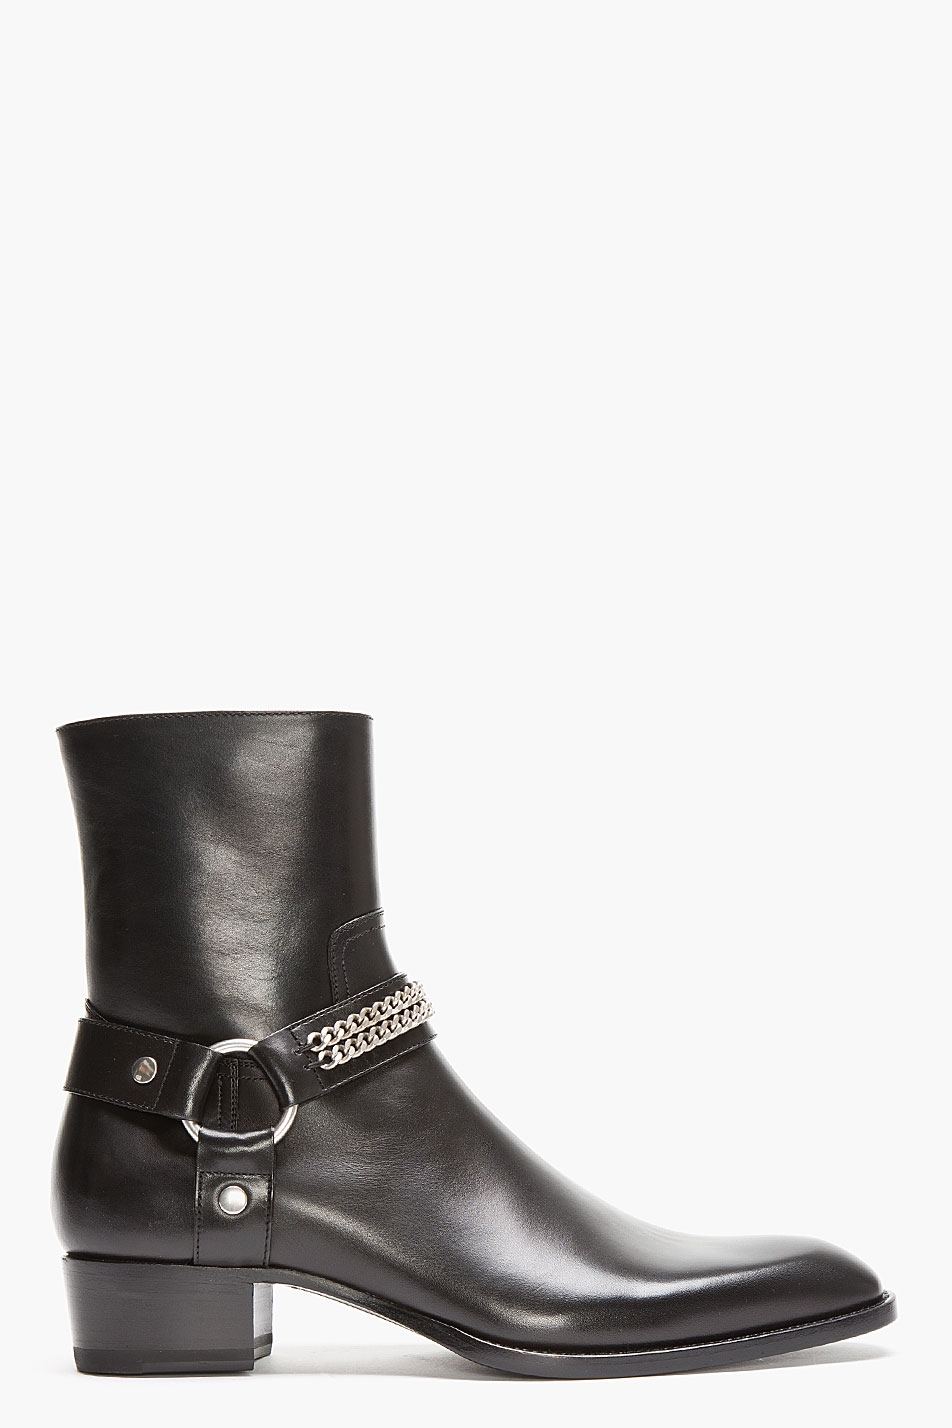 Saint Laurent Black Leather Chain and Zip Boots in Black for Men | Lyst